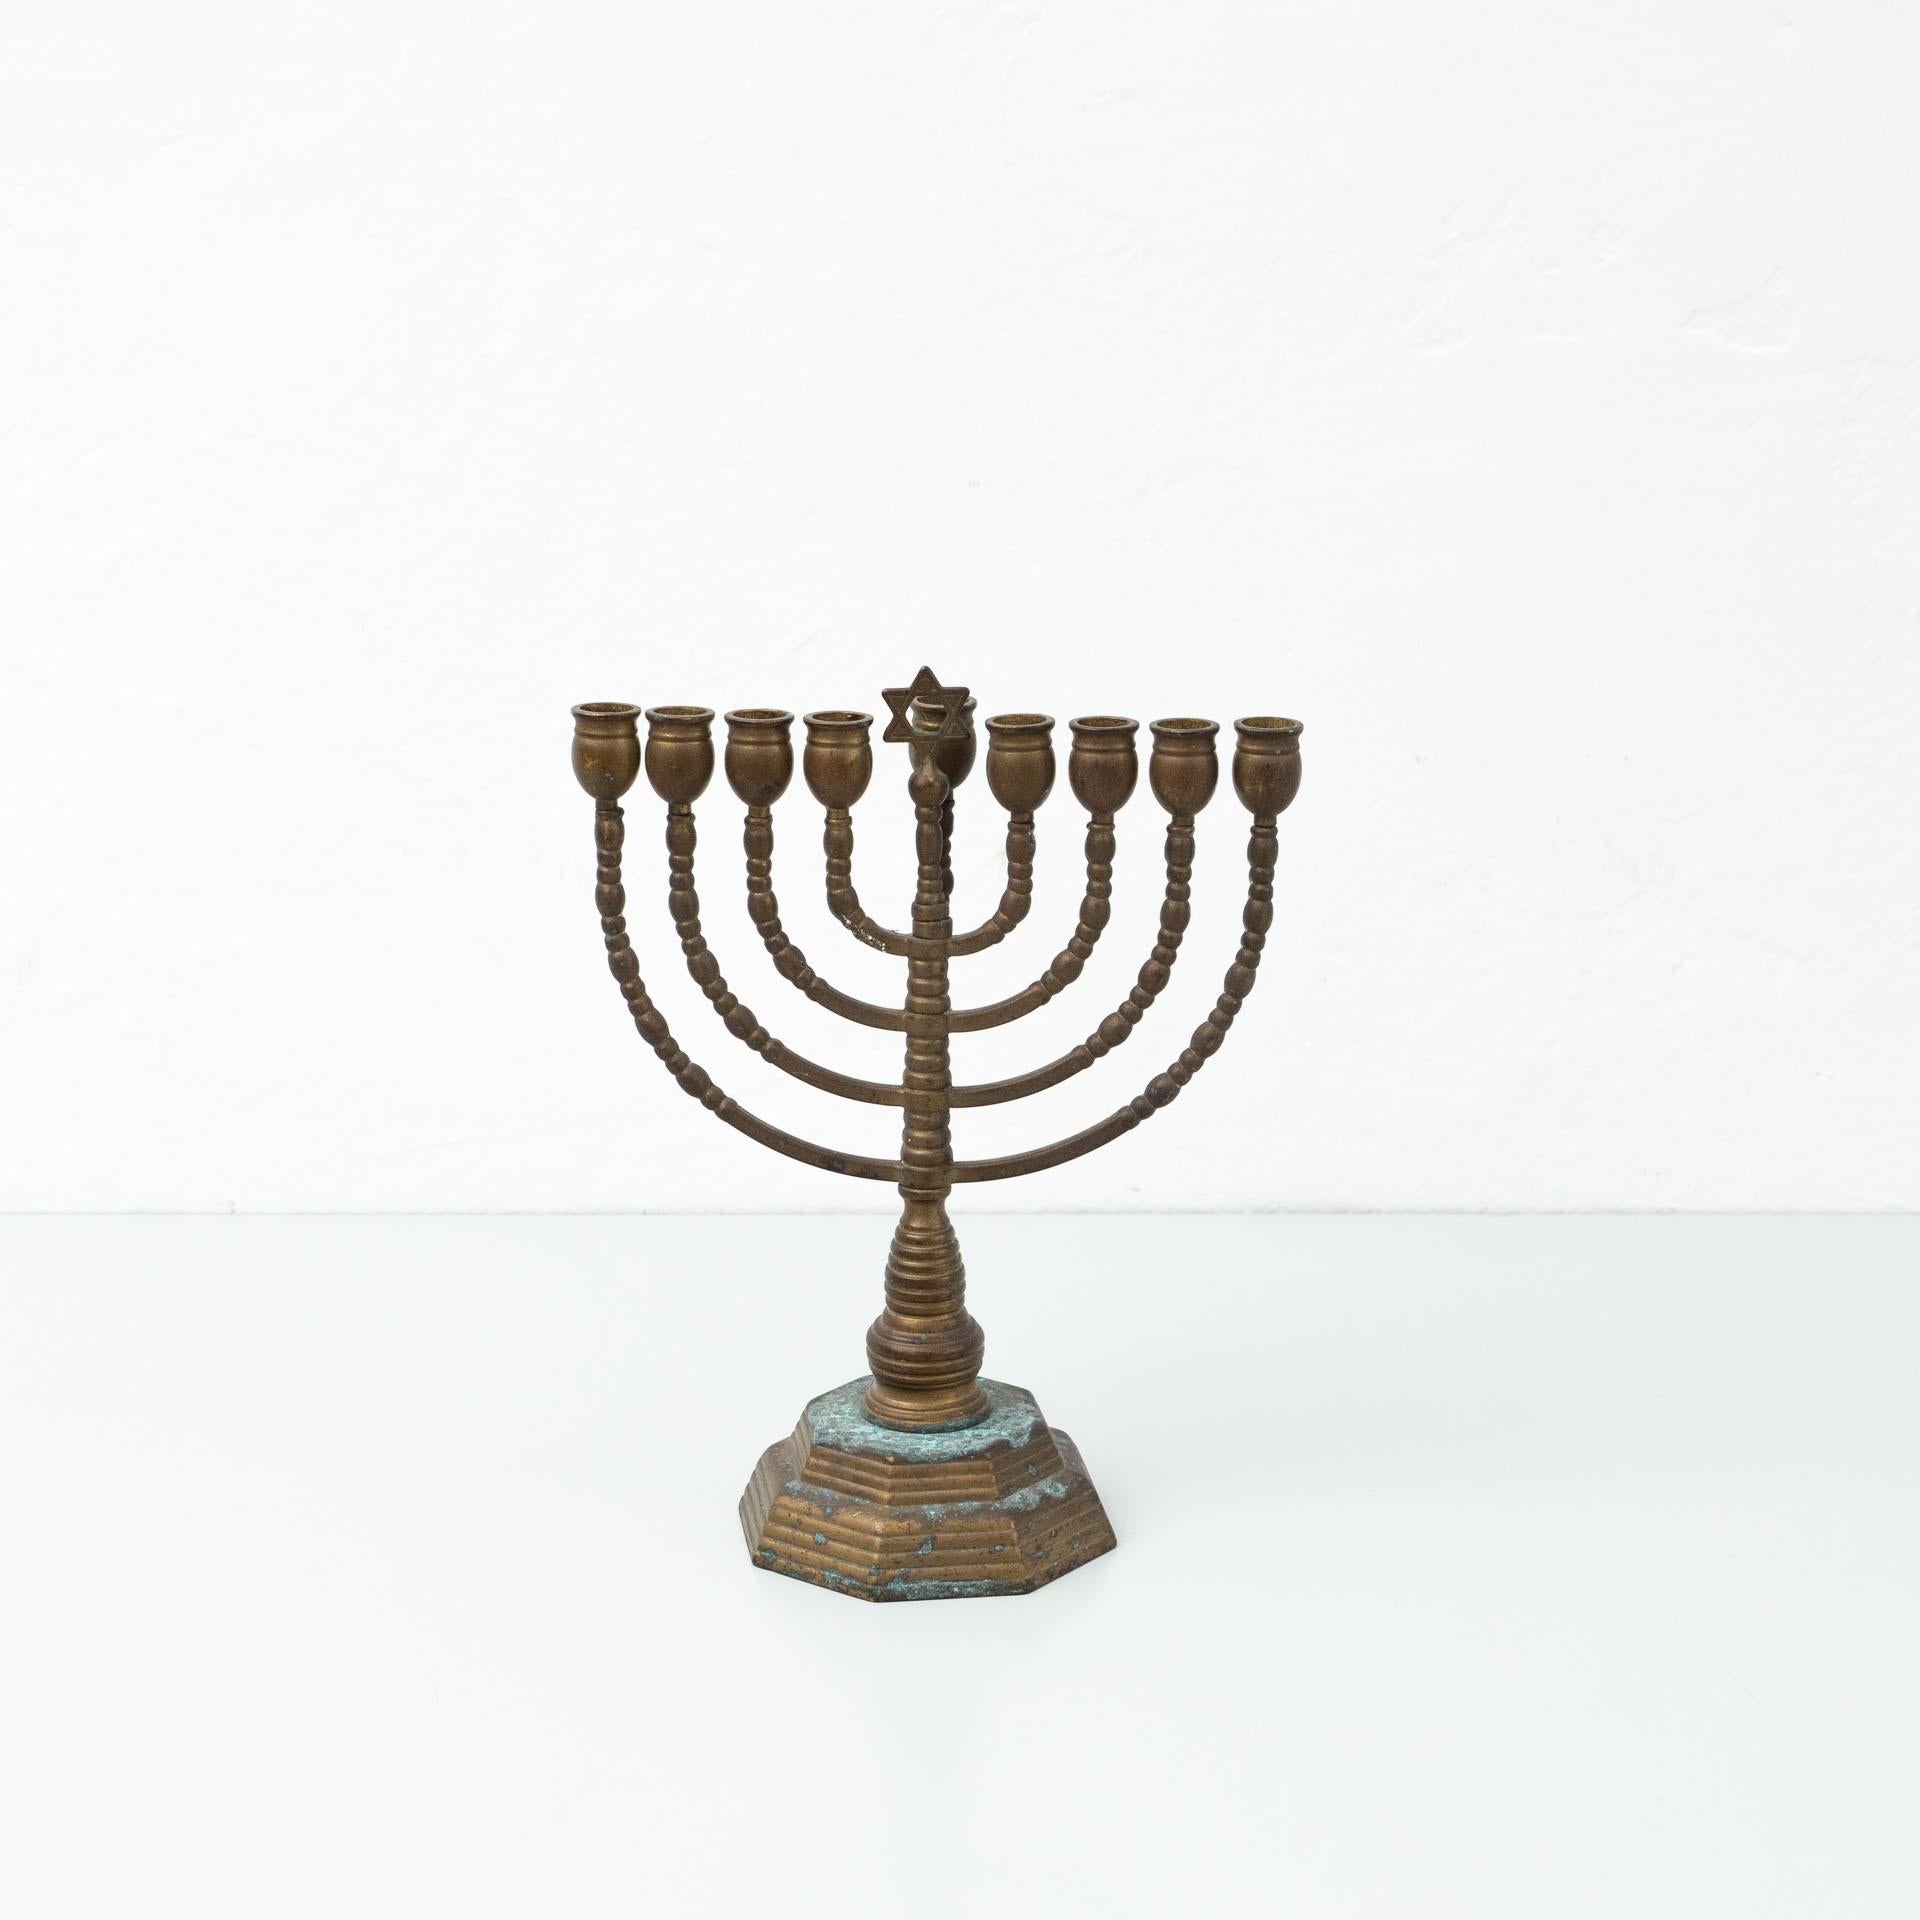 Antique traditional Jewish chandelier.
By unknown manufacturer, circa 1940.

In original condition, with minor wear consistent with age and use, preserving a beautiful patina.

Materials:
Metal


Dimensions (each one):
D 12.5 cm x W 24.2